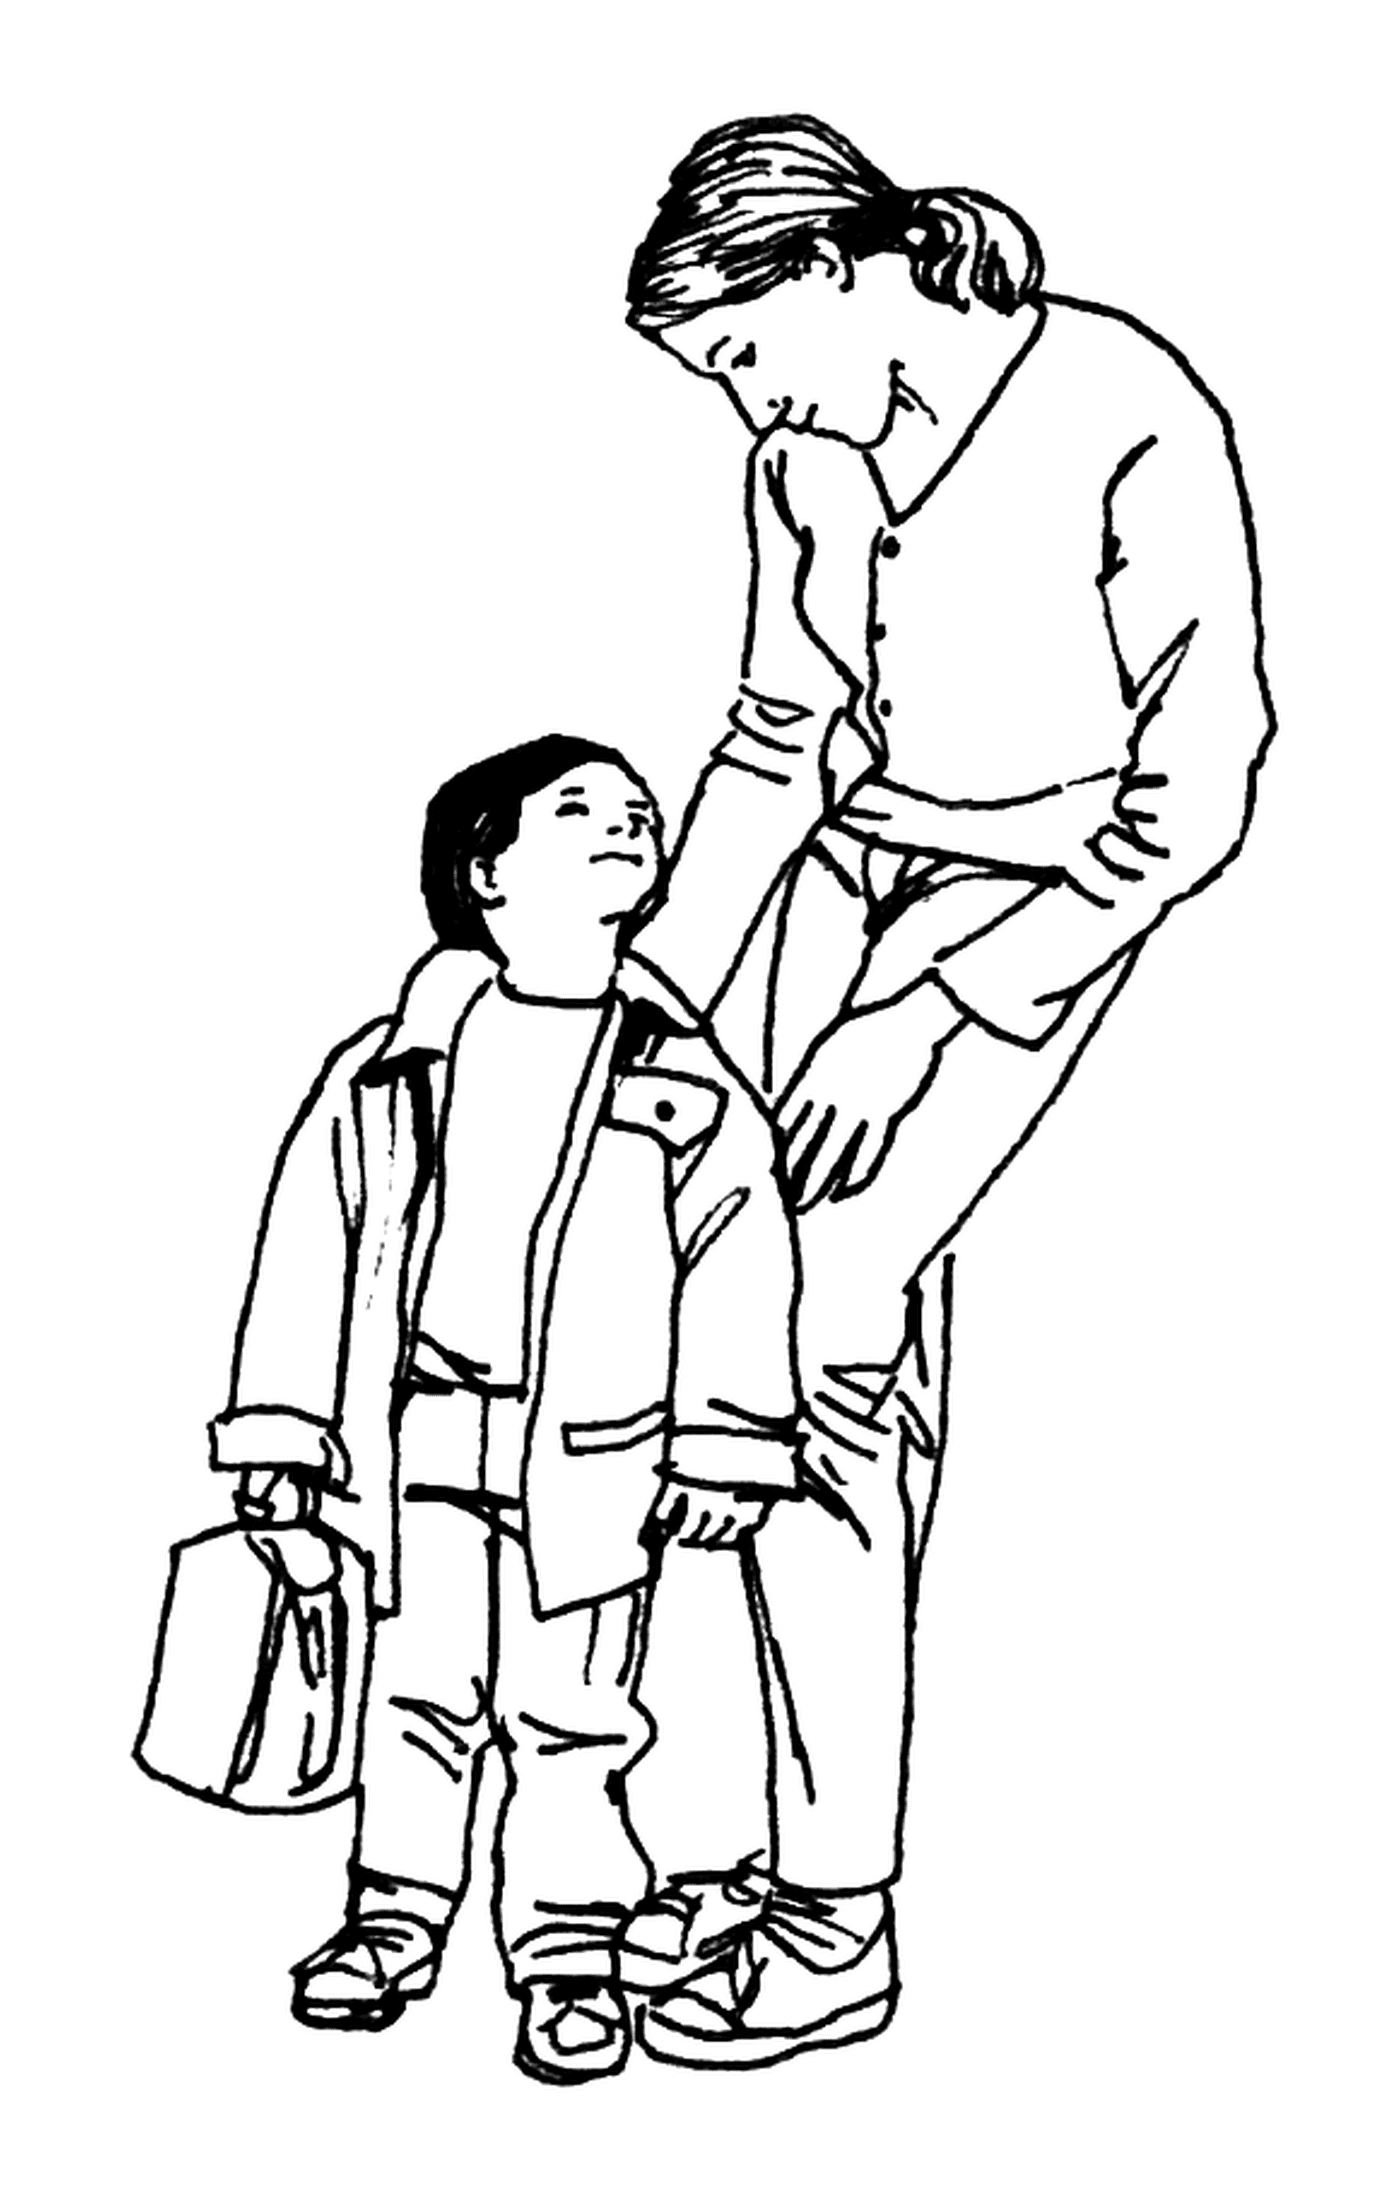  A mother accompanies her son to school 